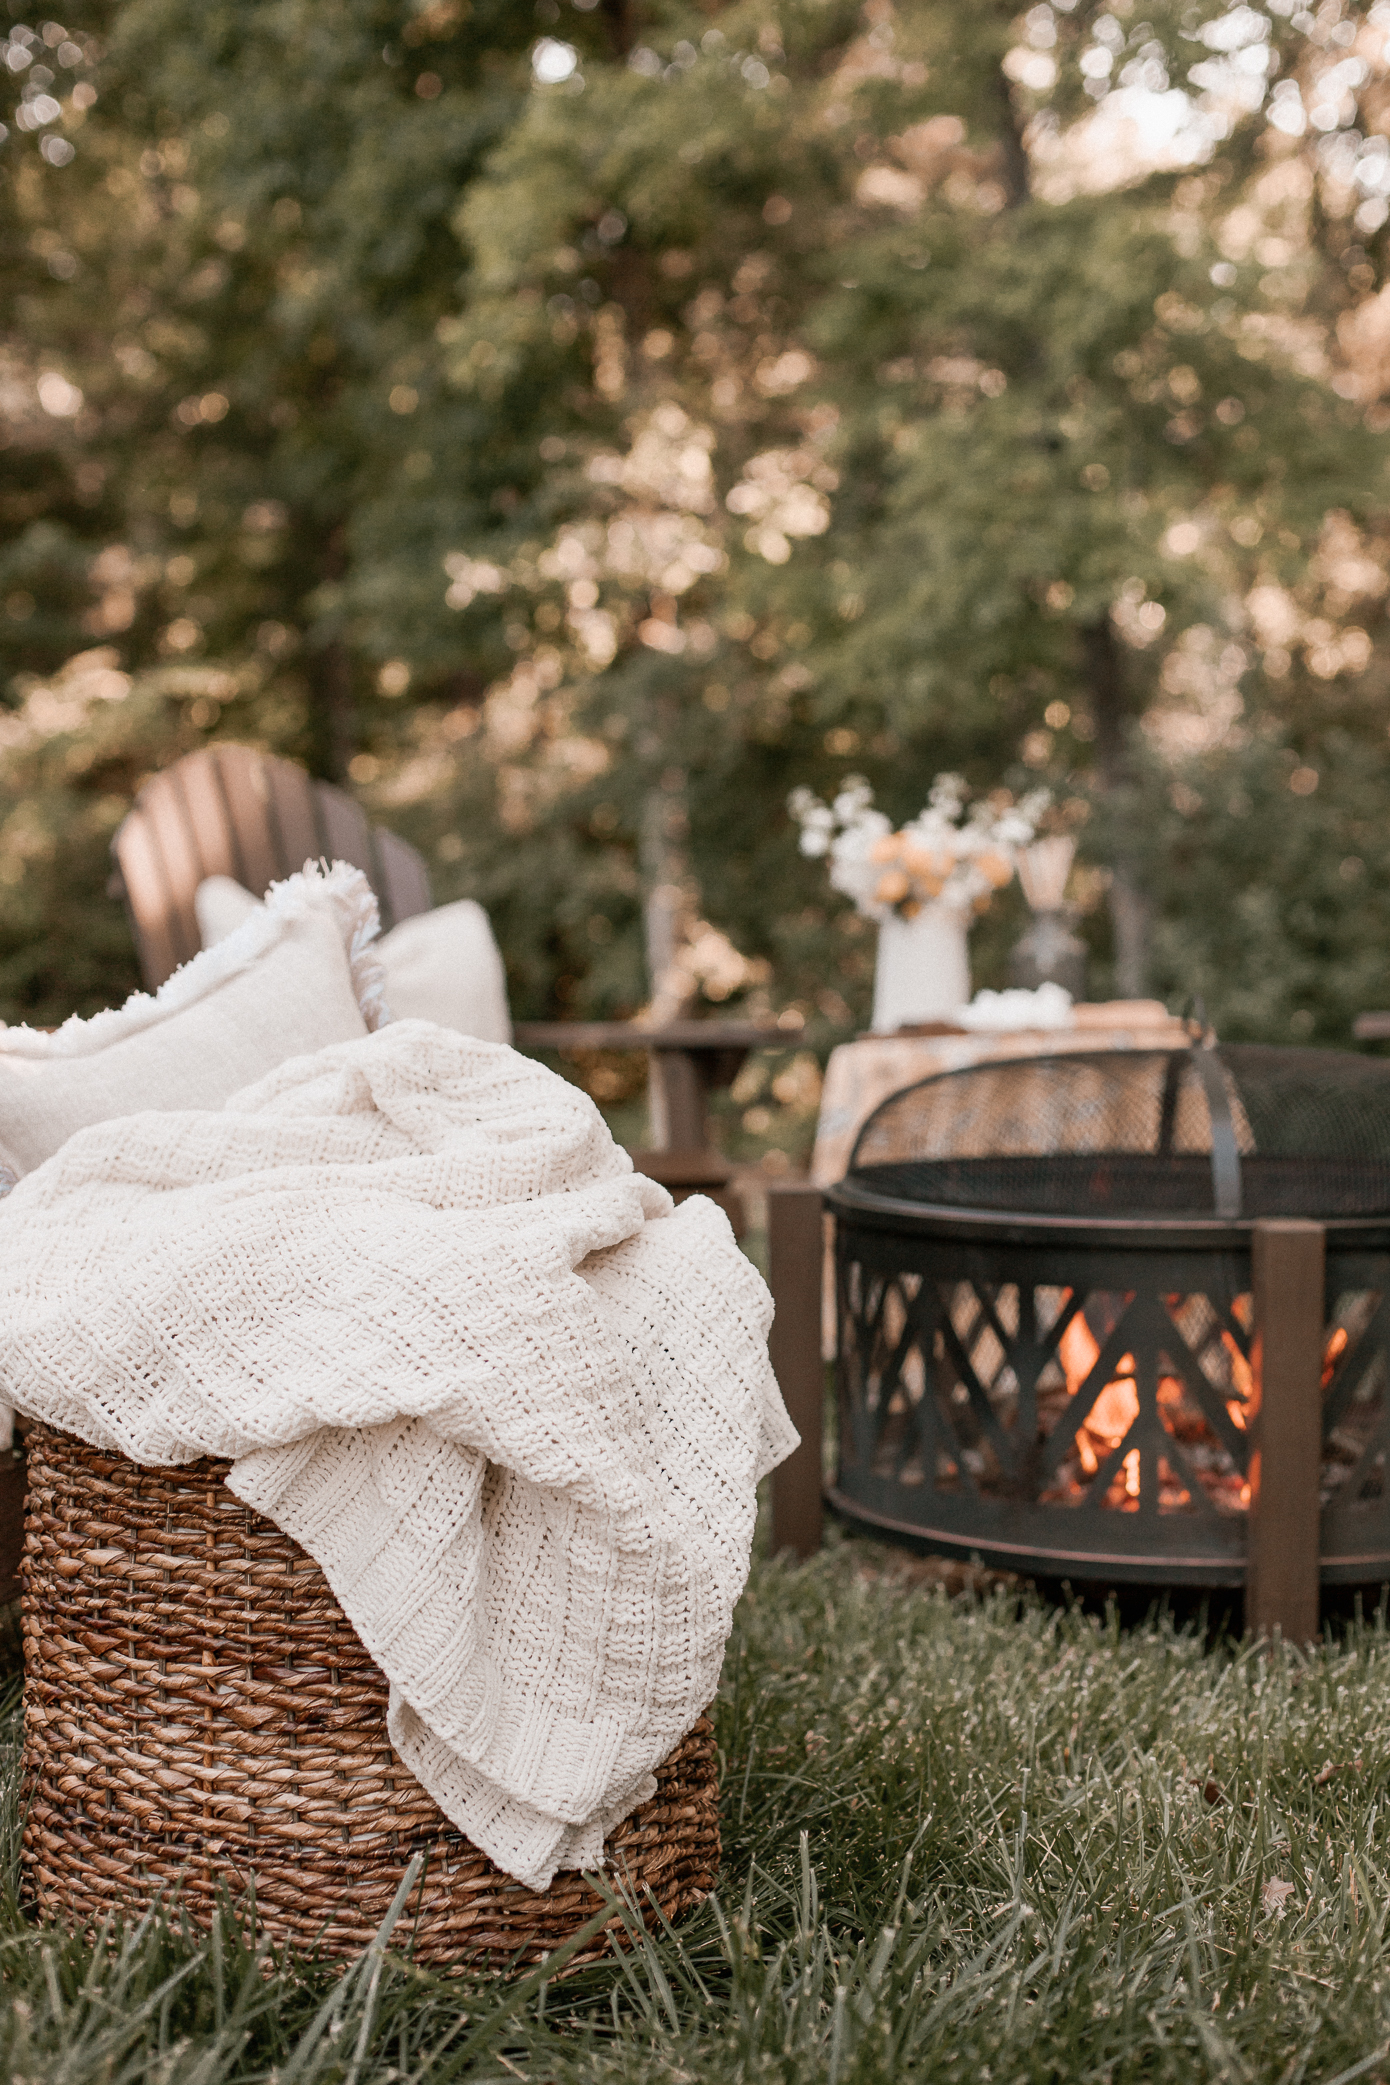 creating a backyard fire pit space | Louella Reese